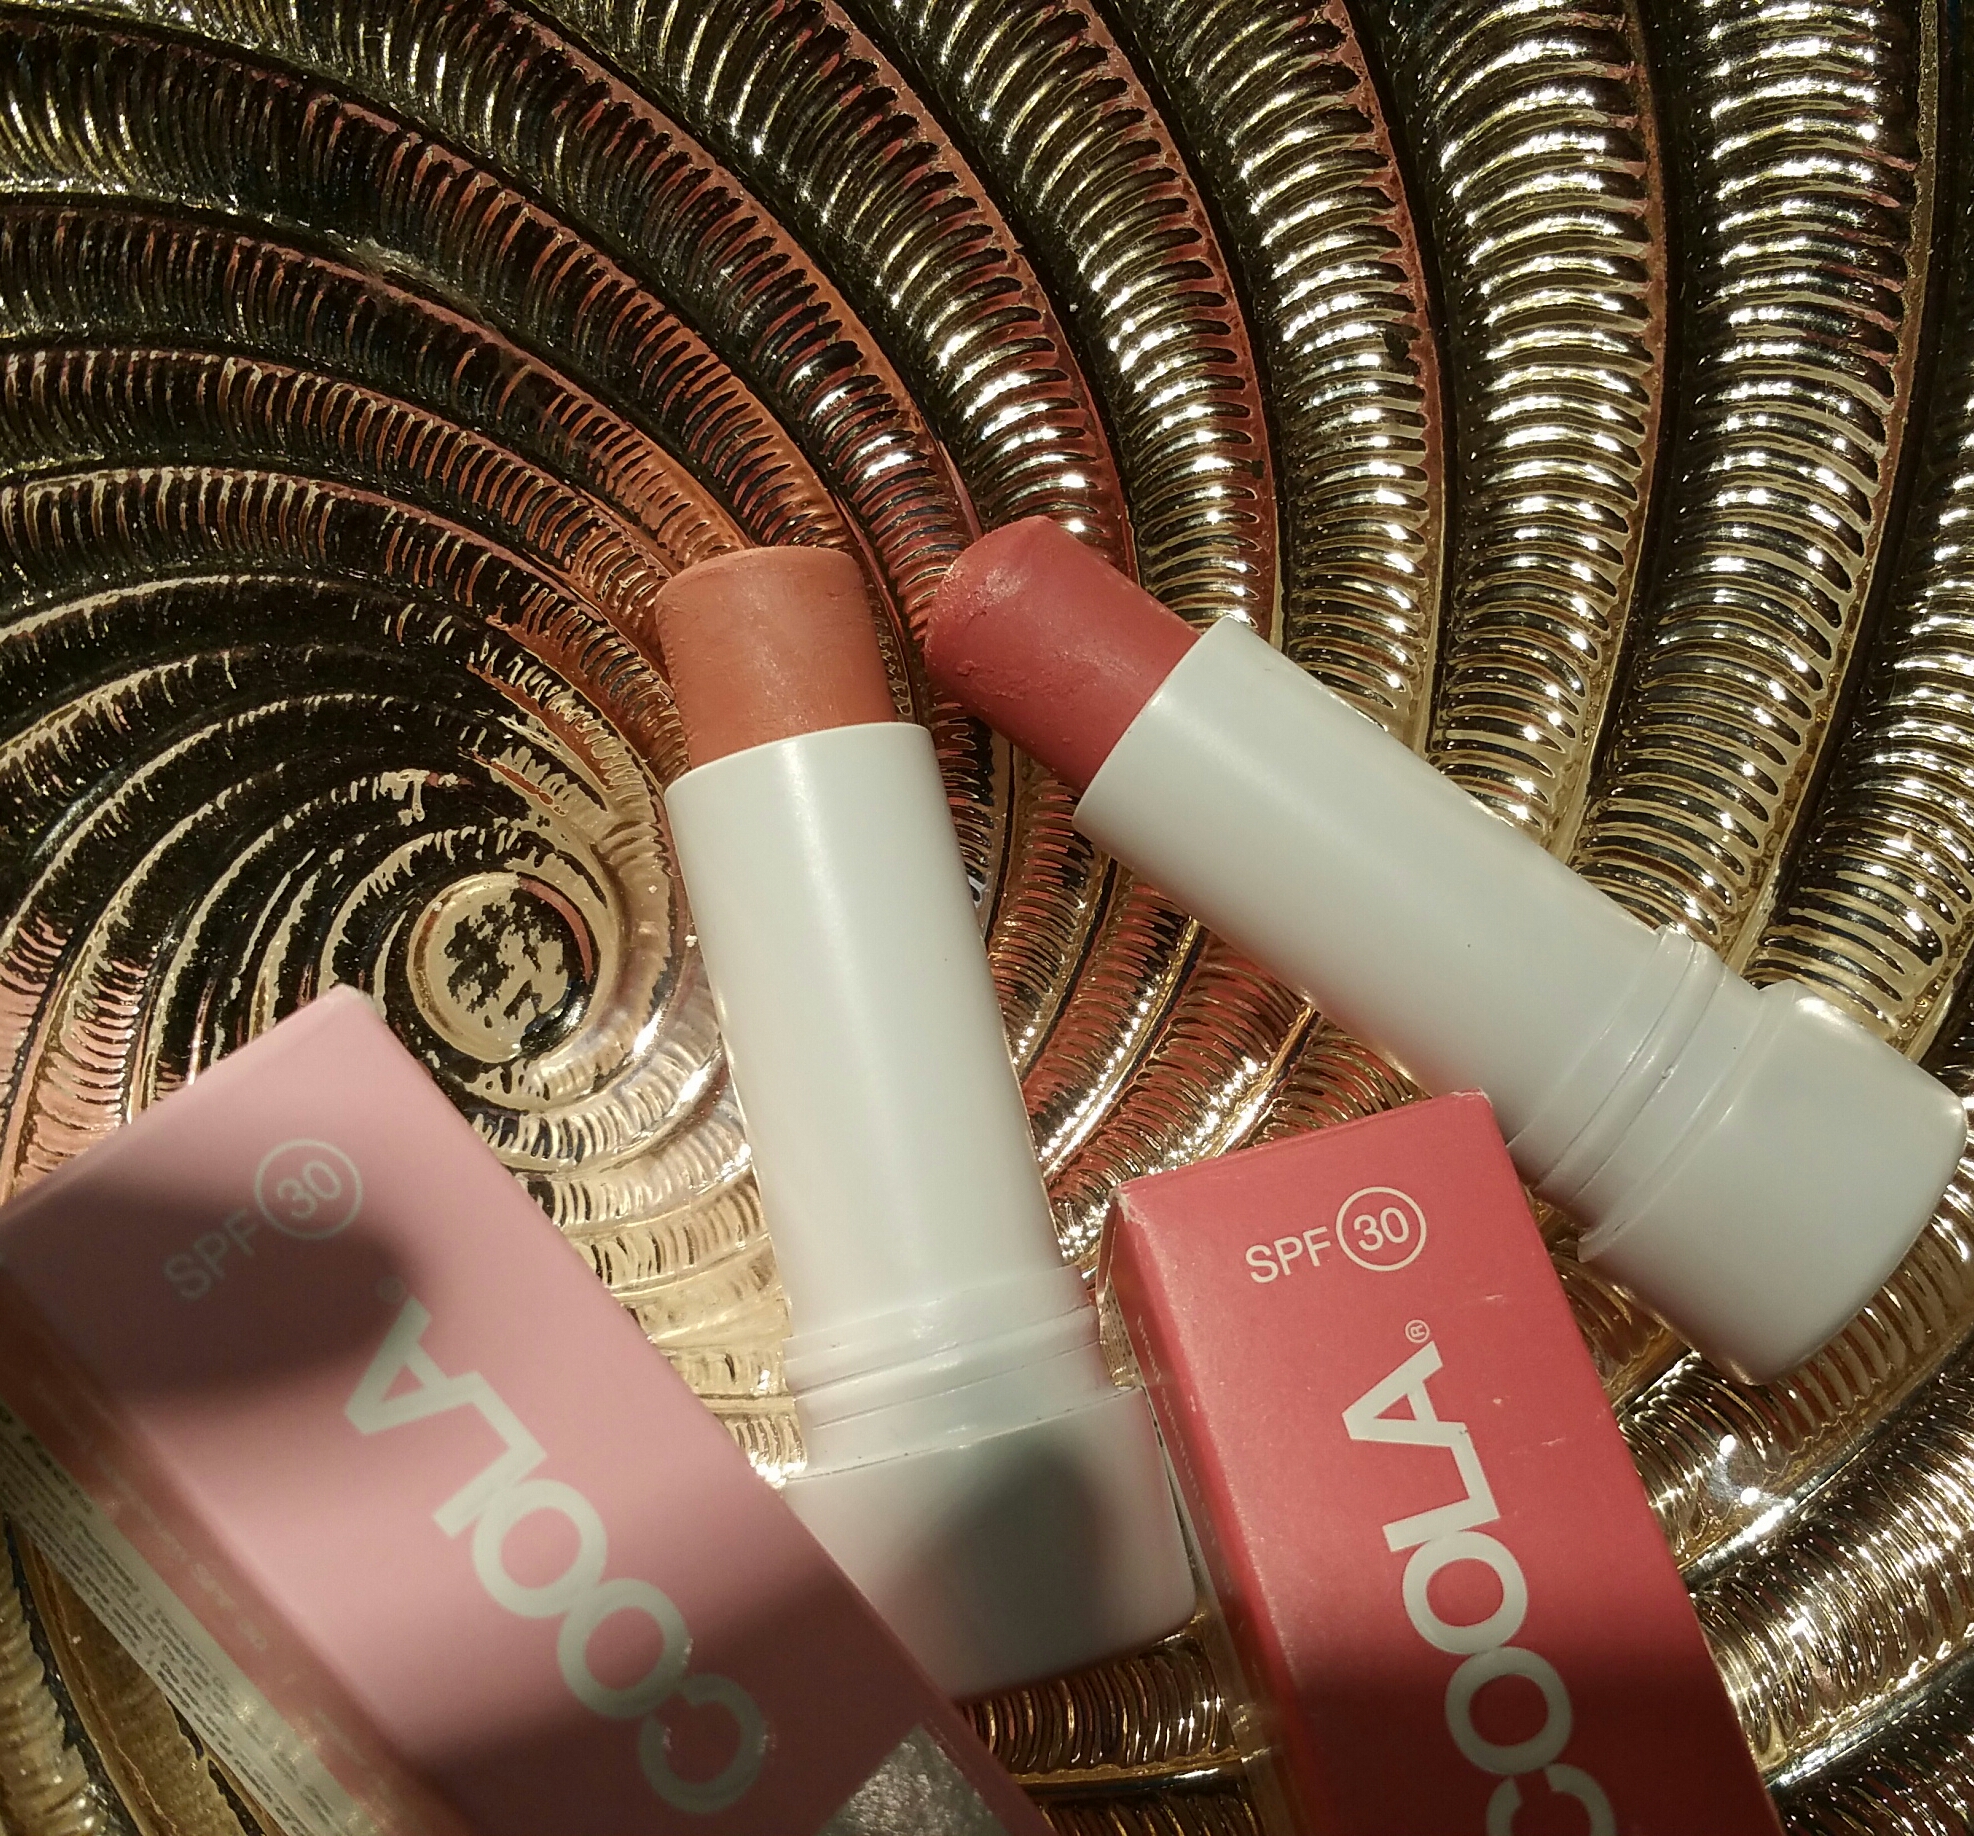 Coola Mineral Tint Liplux SPF 30 New for 2016 – Nude Beach Pink) Summer Crush (Deep Pink): Review, Ingredients, and Swatches! – cosmetichaulic.com